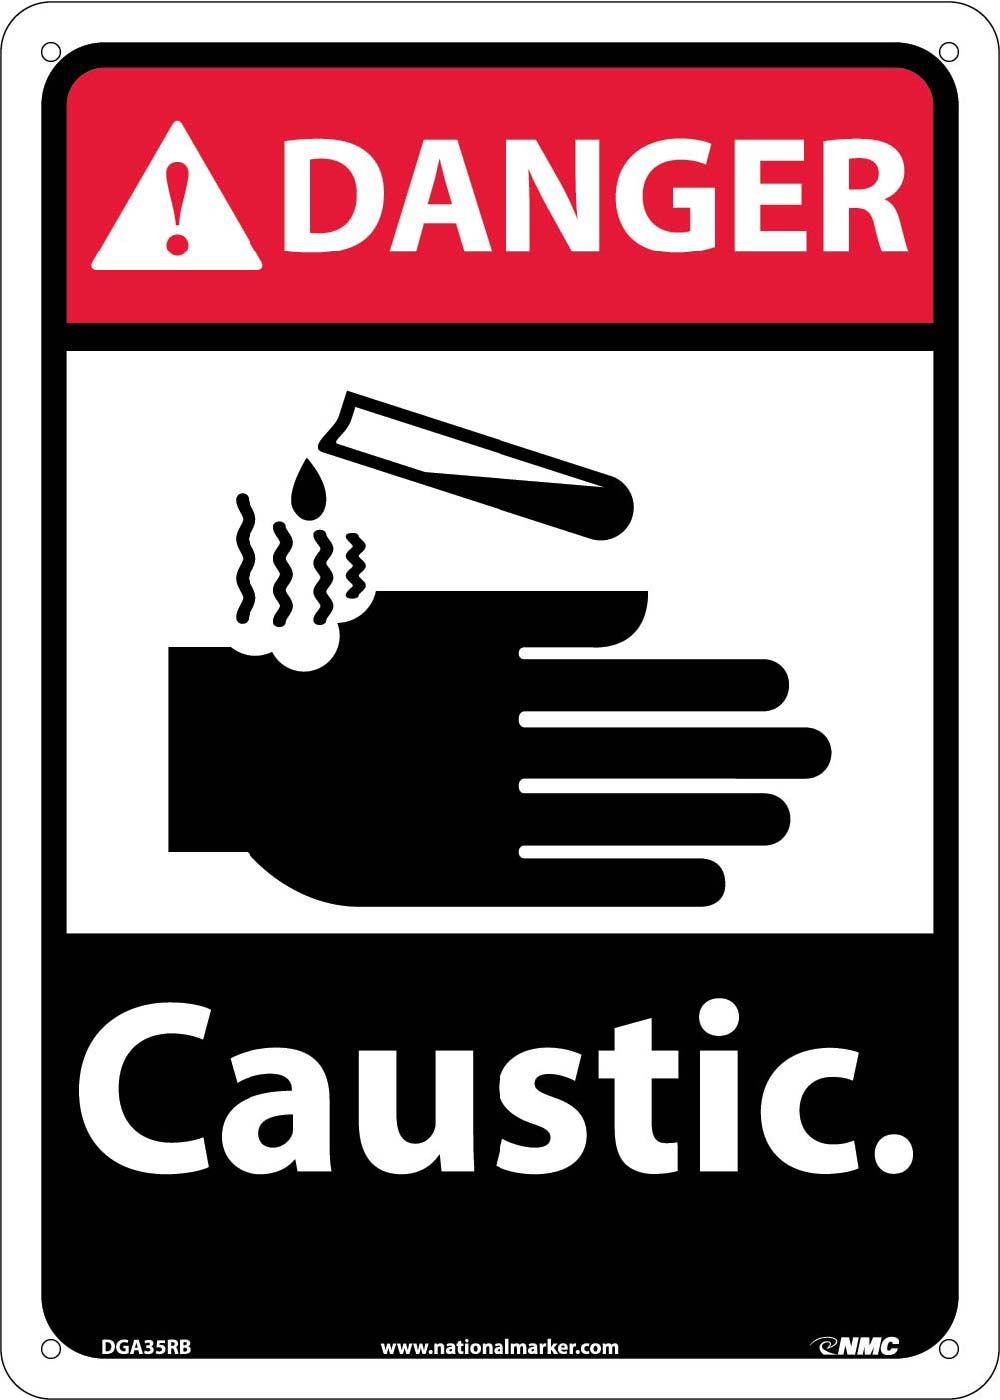 Danger Caustic Sign-eSafety Supplies, Inc